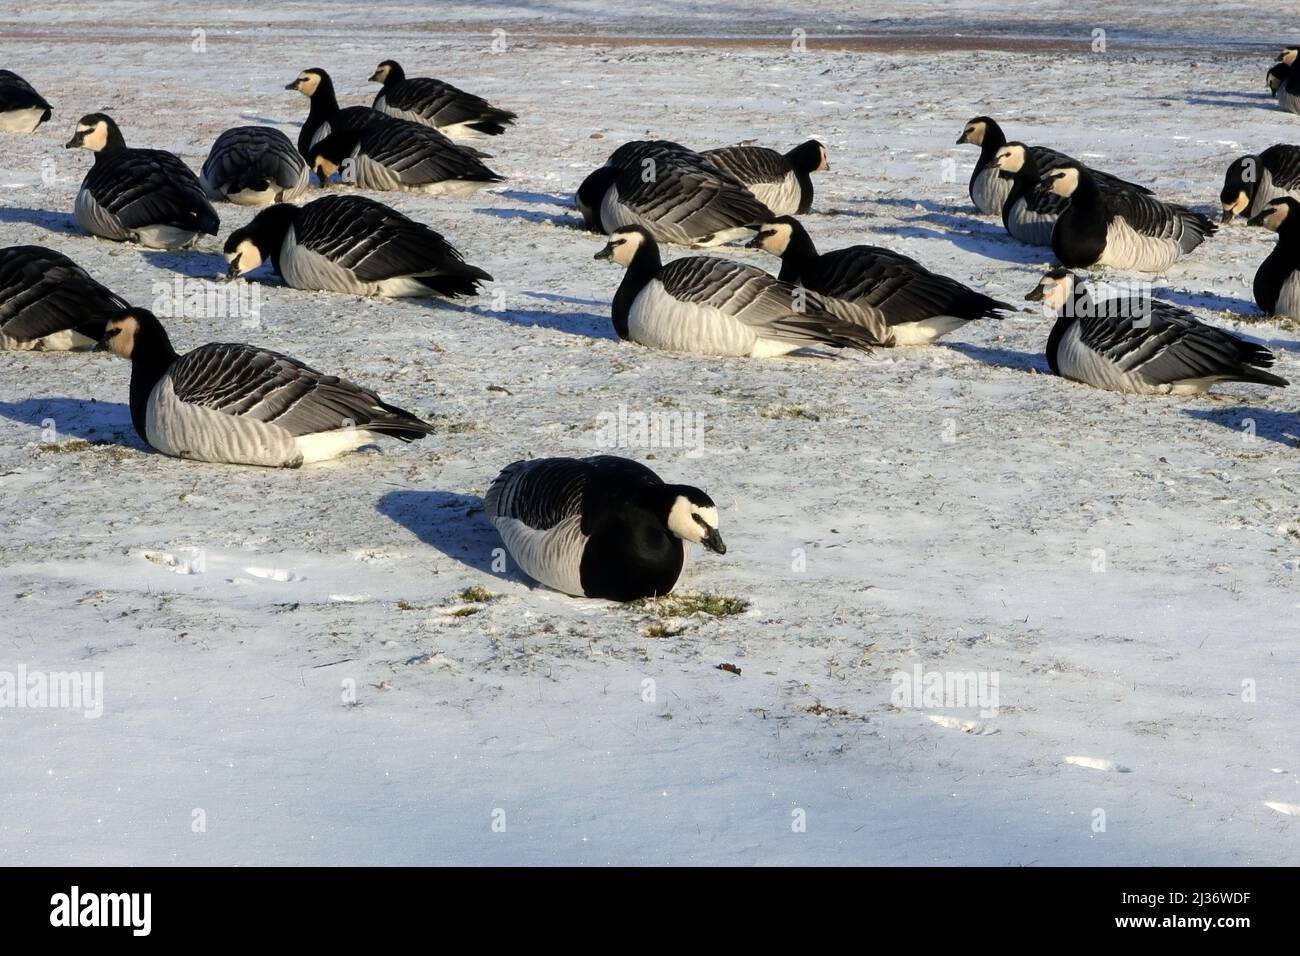 Helsinki, Finland. April 6, 2022. Migratory Barnacle geese, branta leucopsis, foraging in snowy grass in the park in Helsinki, Finland in April 2022 as winter returned with snowfall to the entire country. The birds are sitting in snow to keep warm. Stock Photo